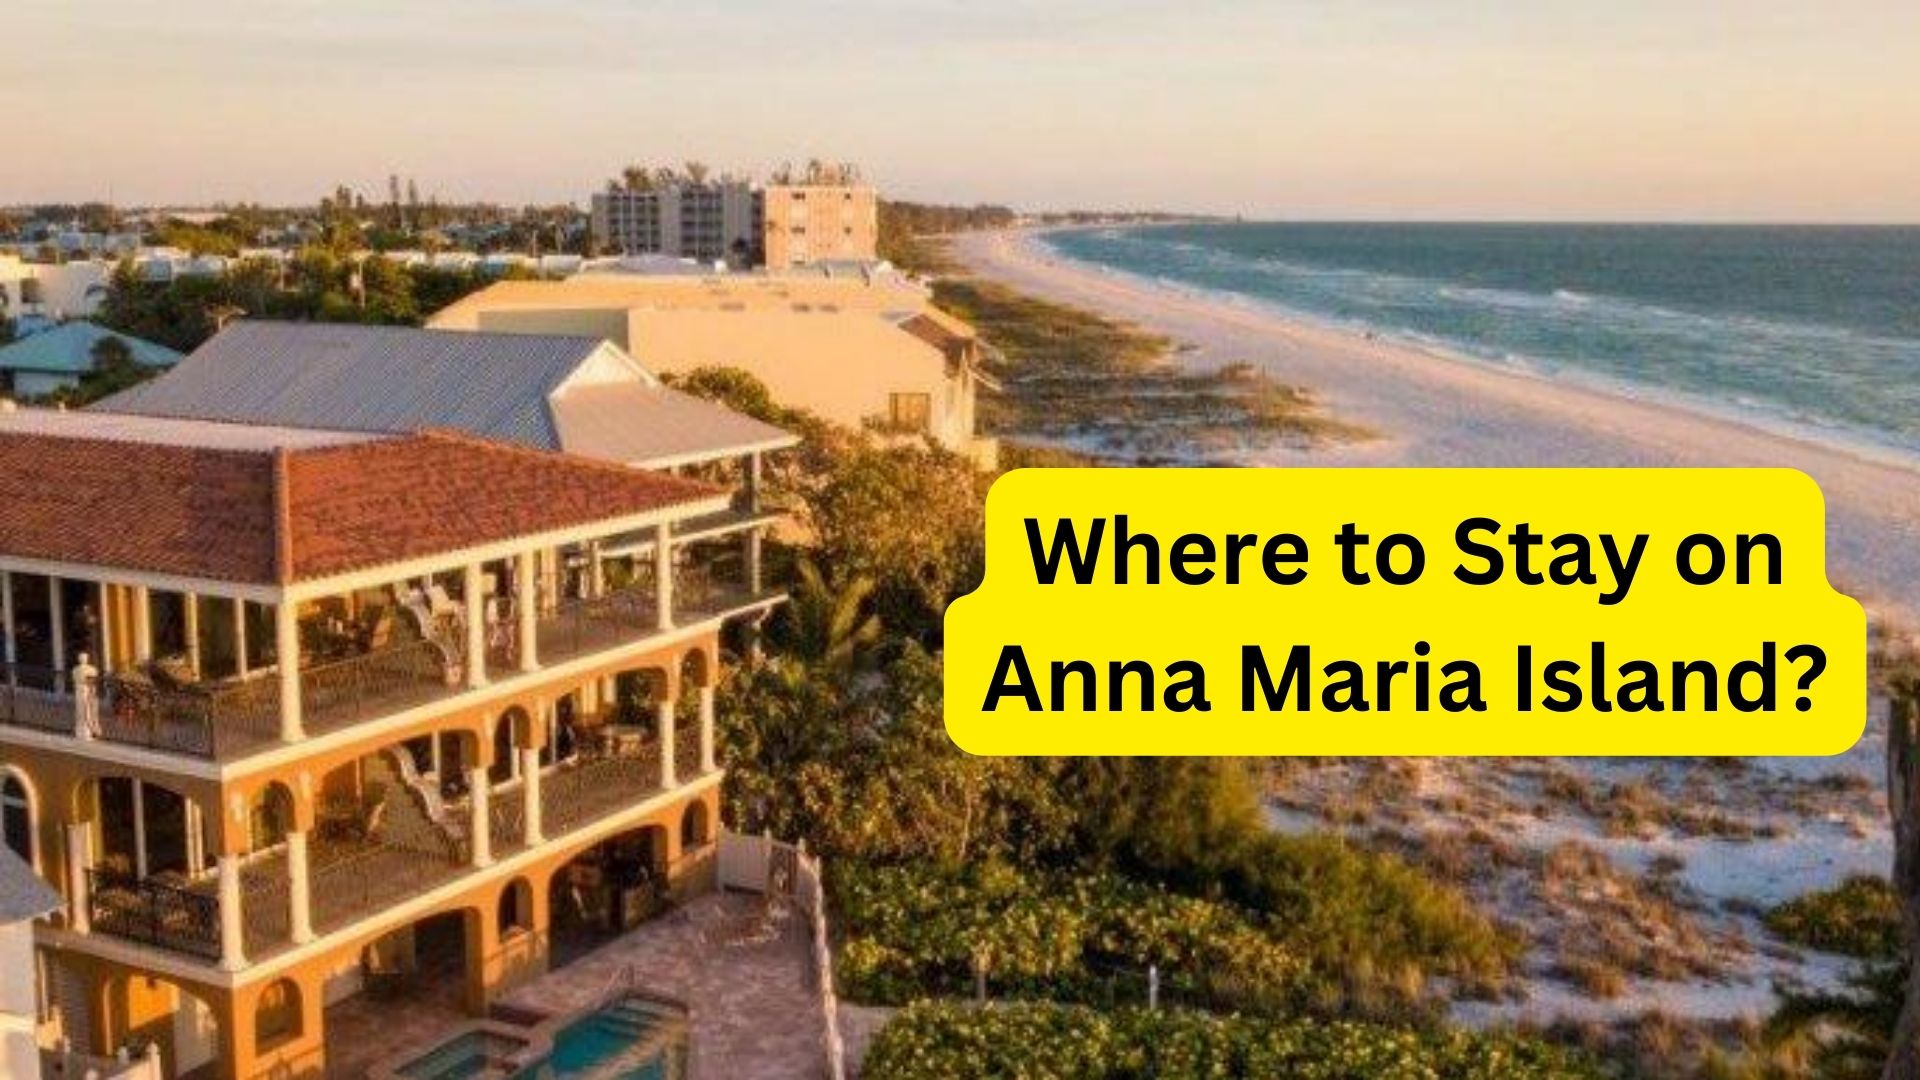 Where to Stay on Anna Maria Island?